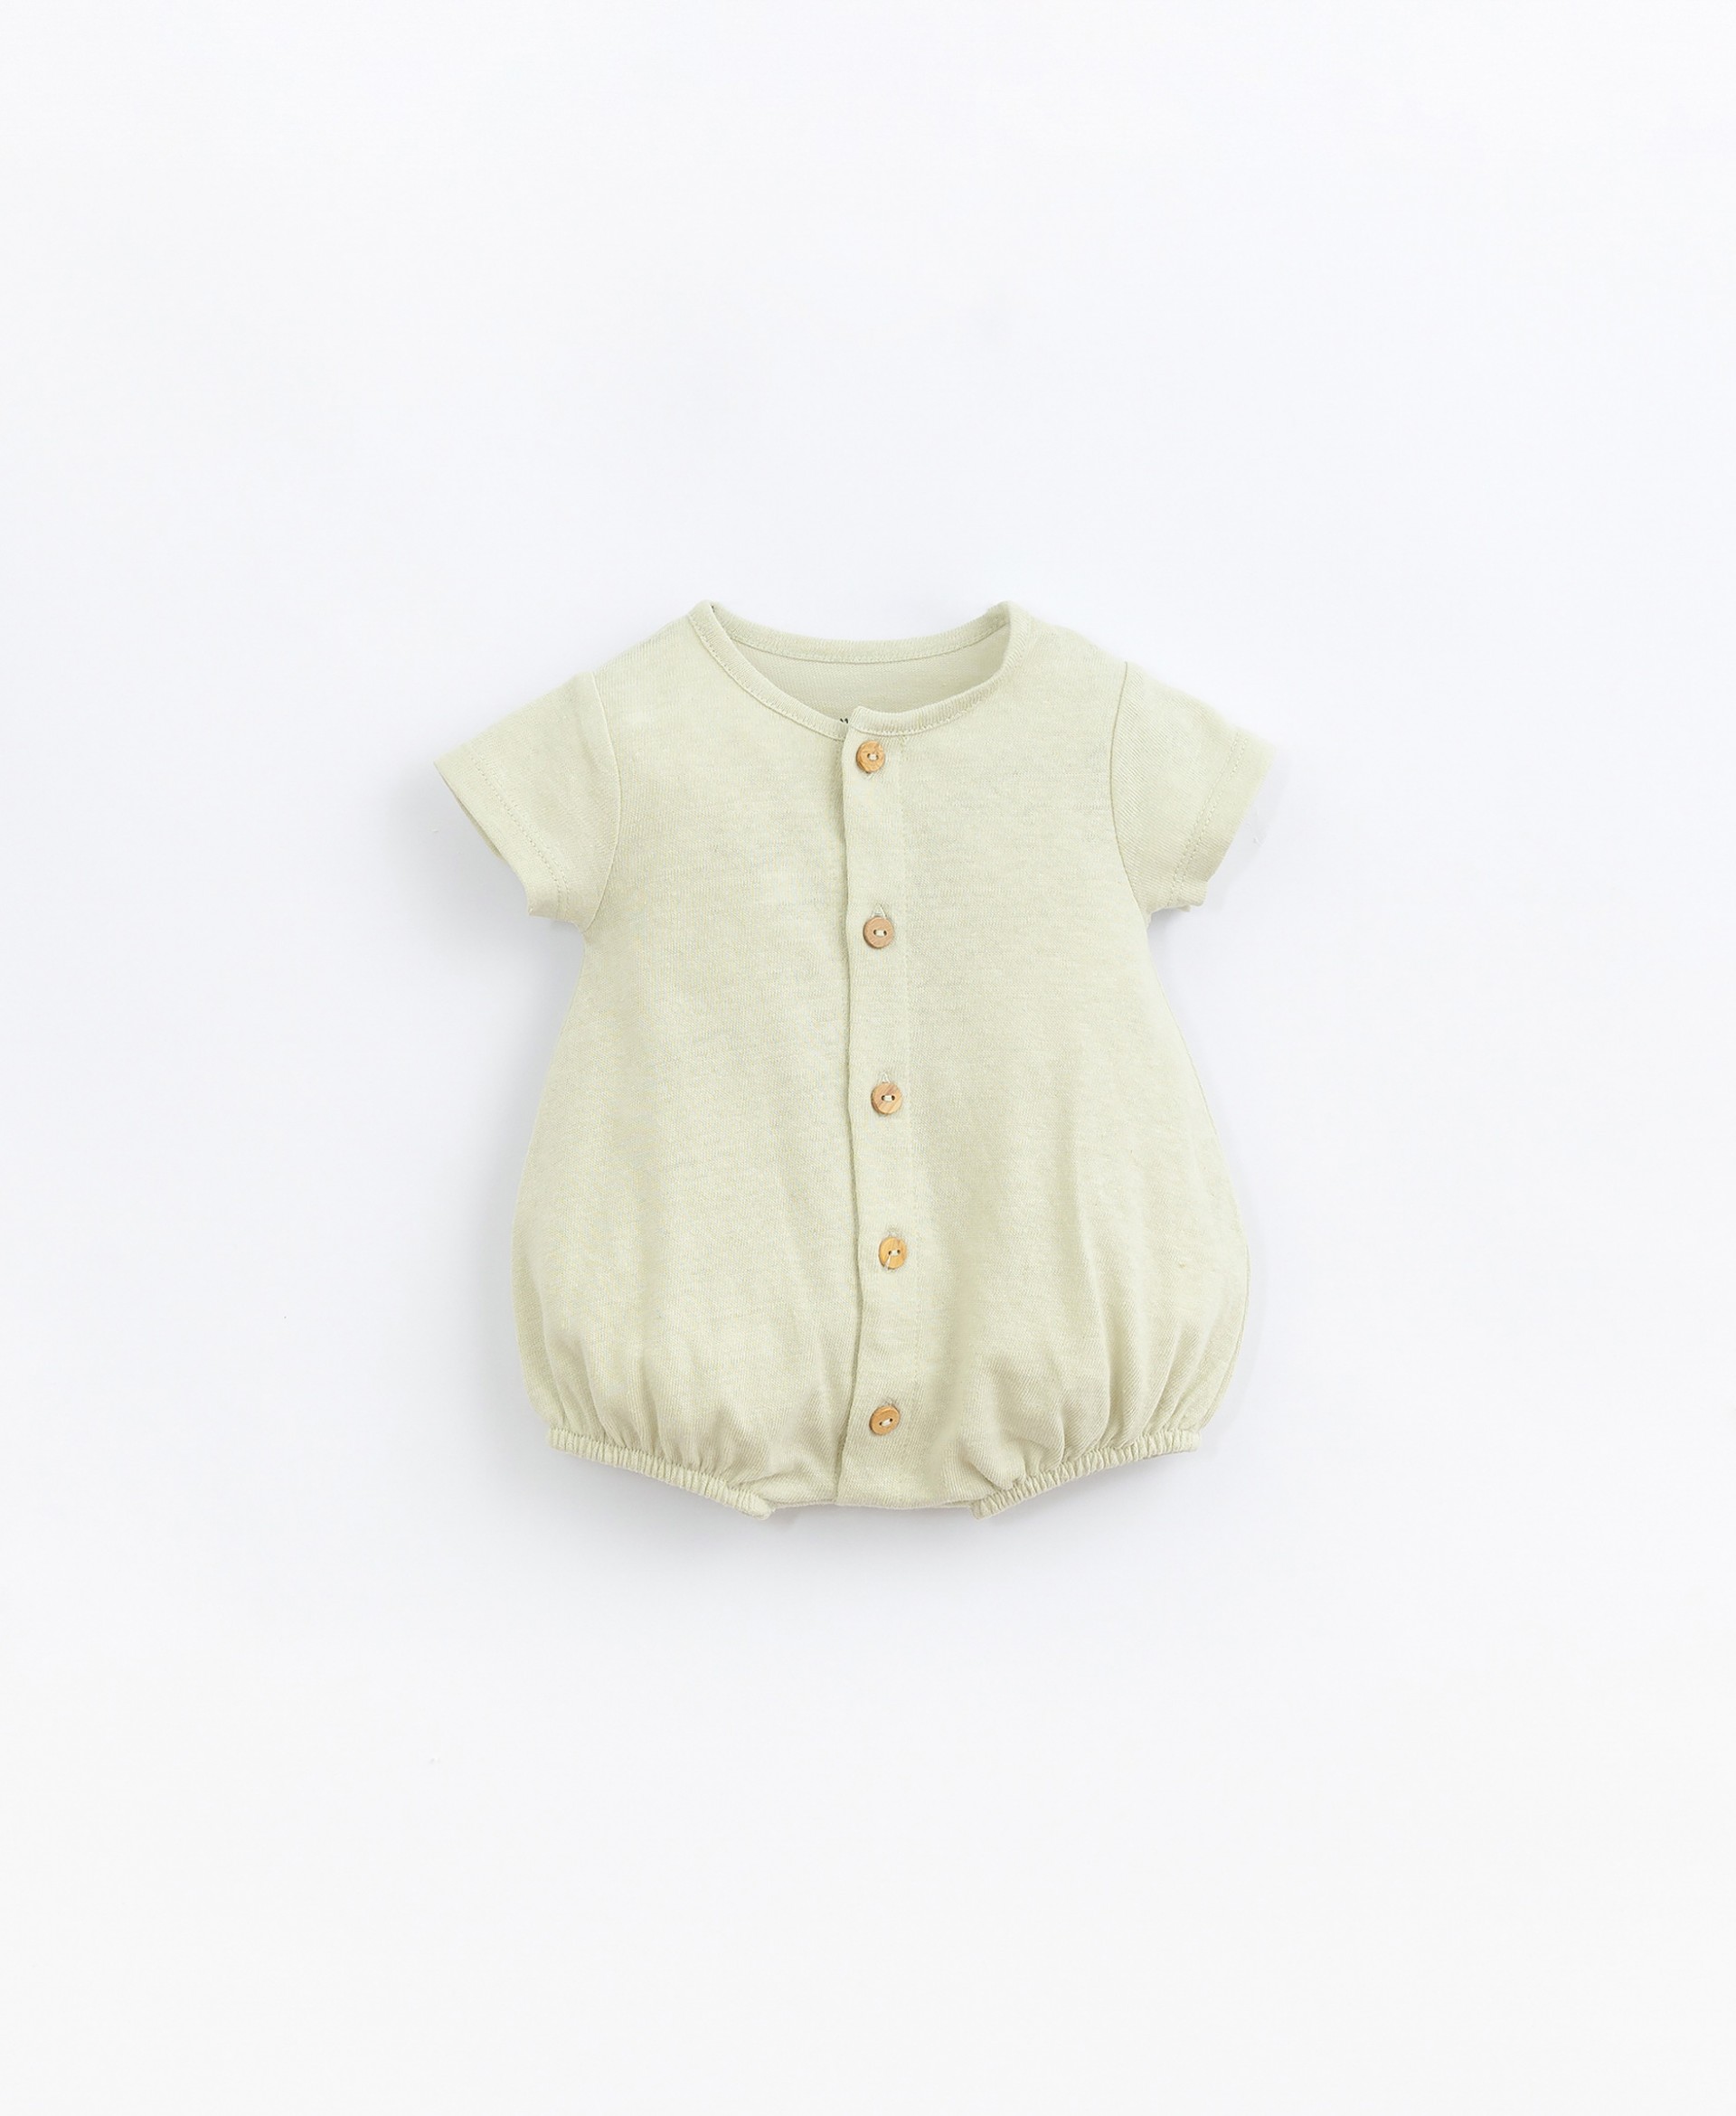 Jumpsuit with wooden button opening | Basketry